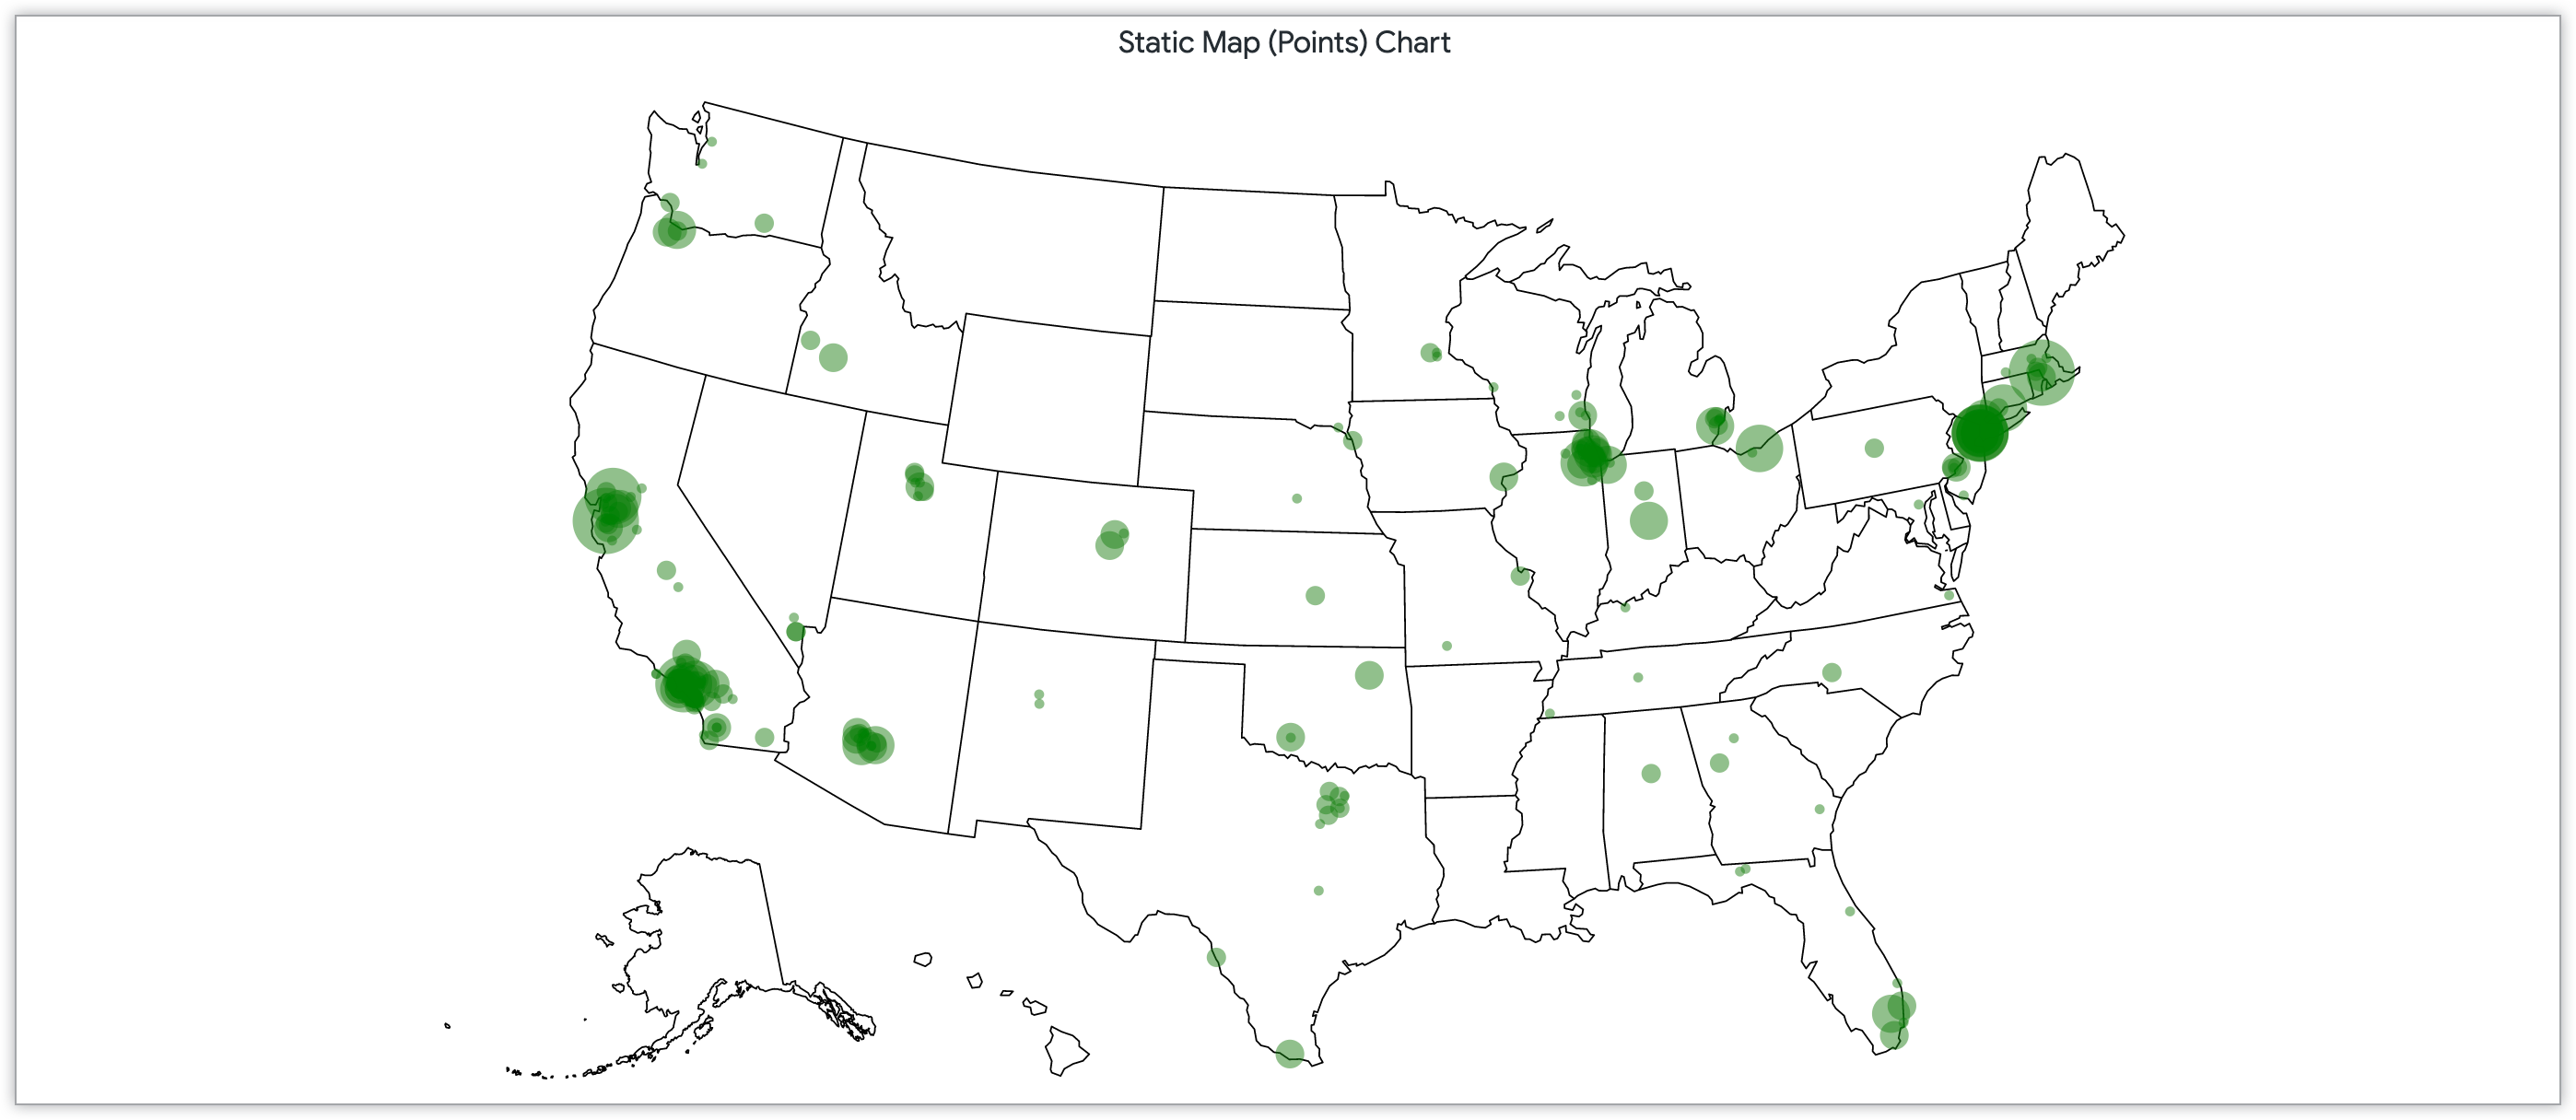 Static map chart with points sized by amount of customers in zip codes throughout the United States.